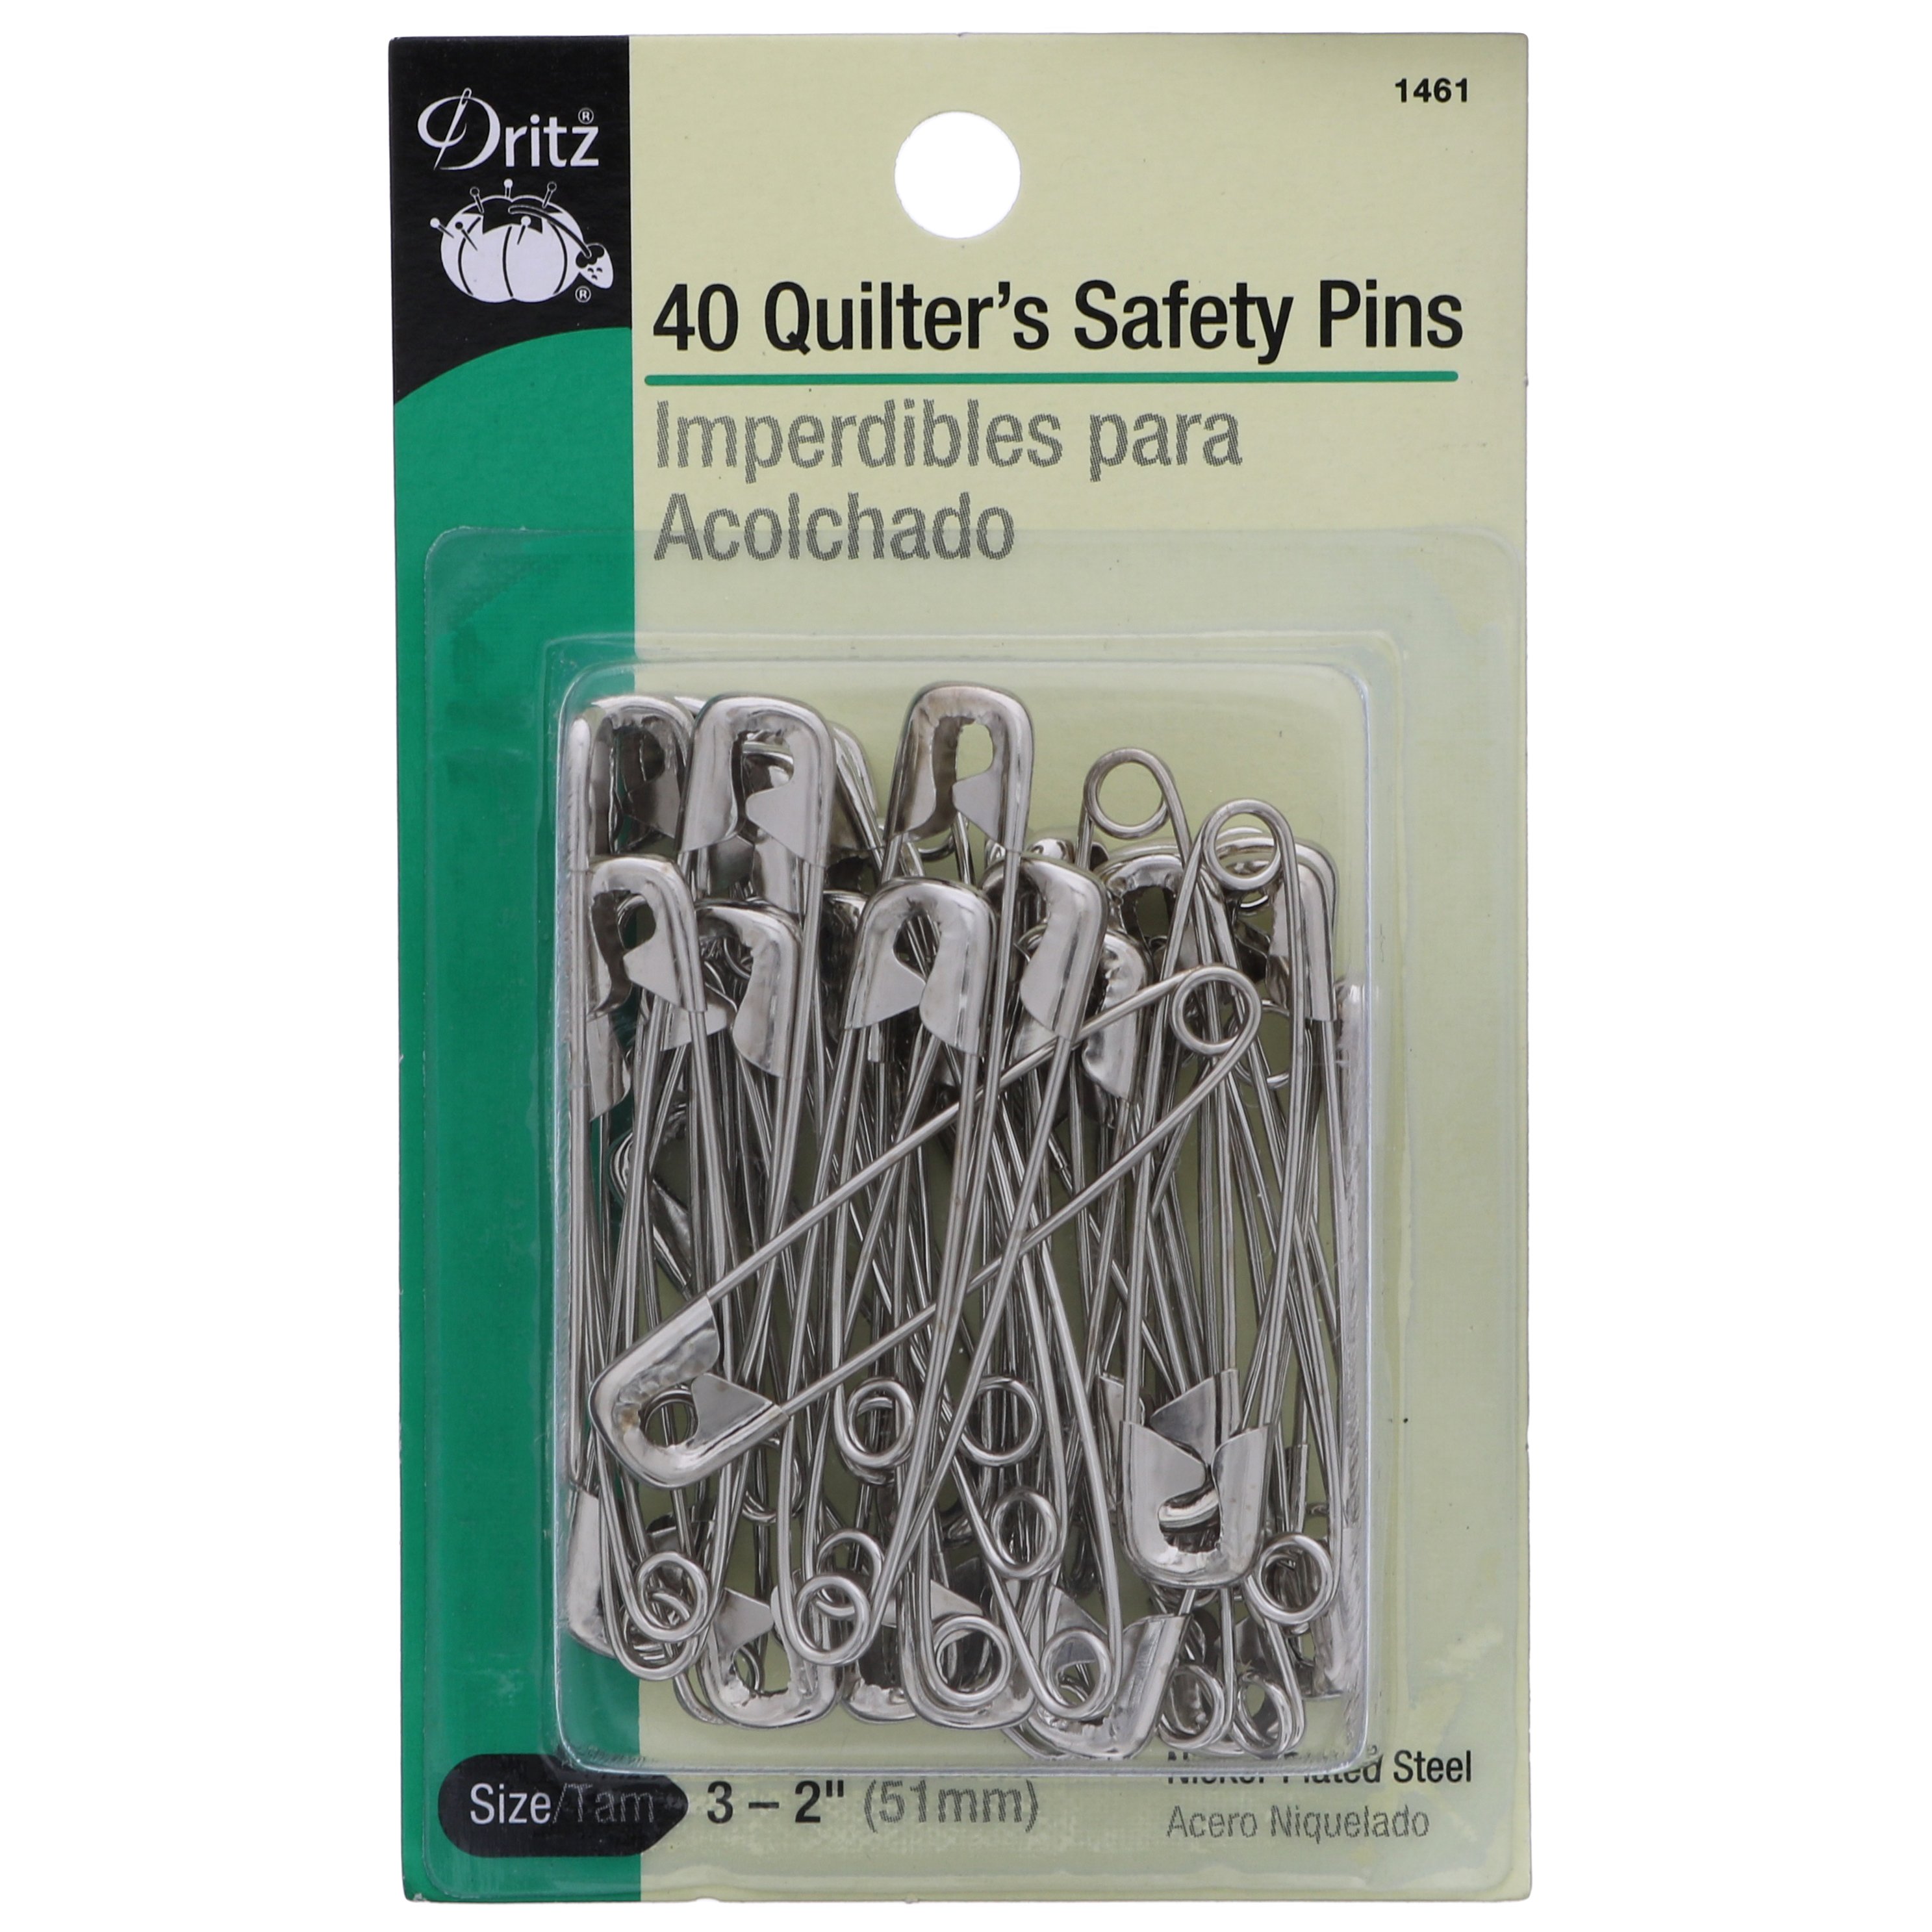 Dritz Quilters Safety Pins